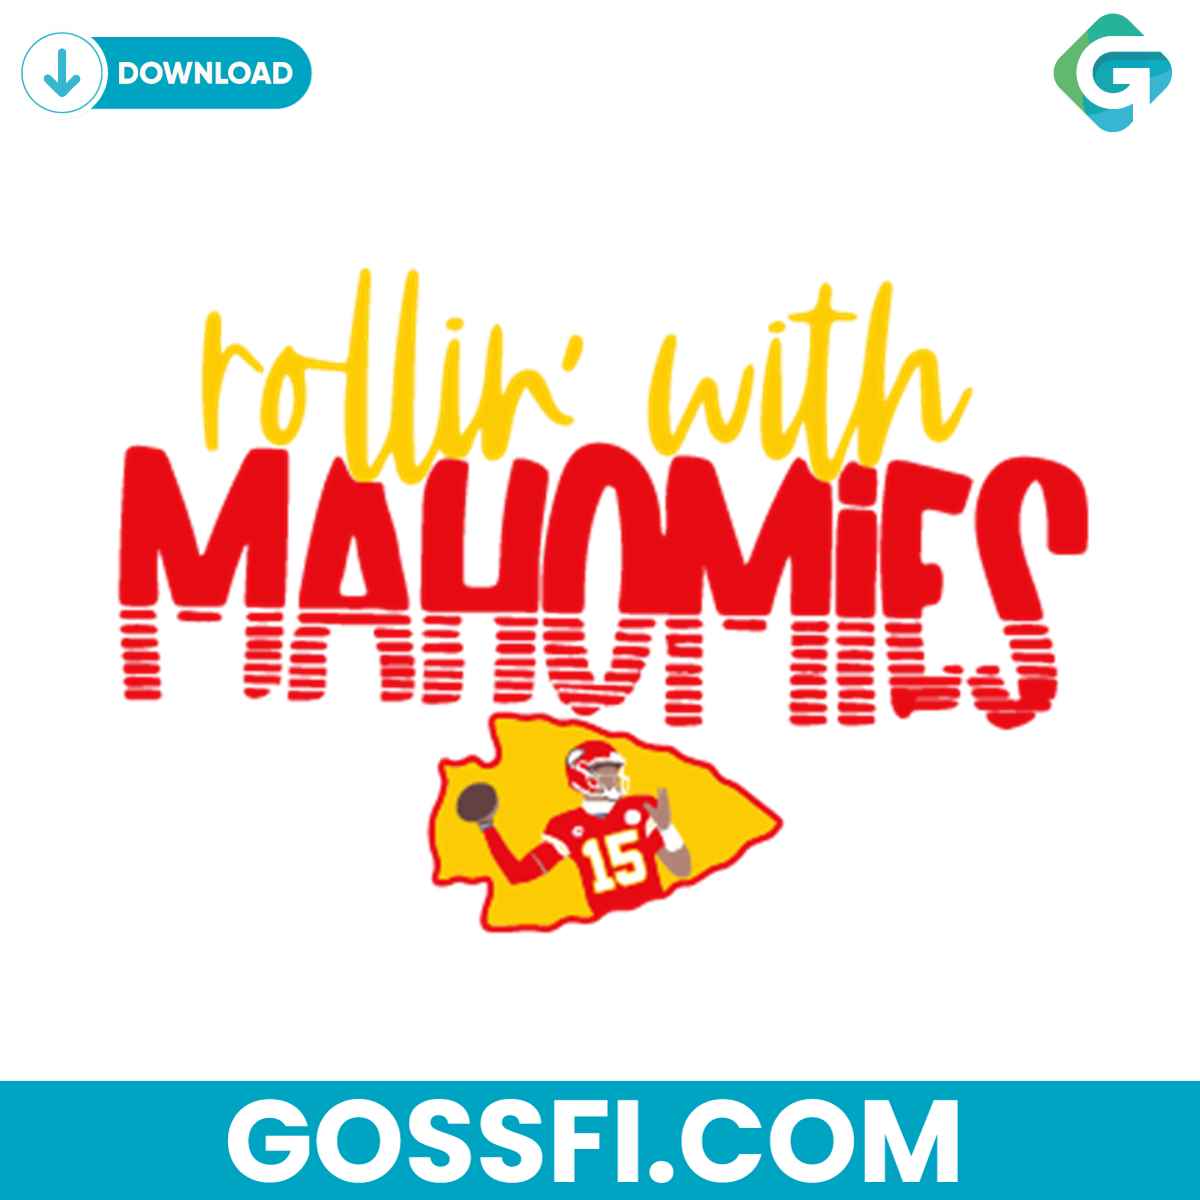 rolling-with-mahomies-chiefs-svg-digital-download